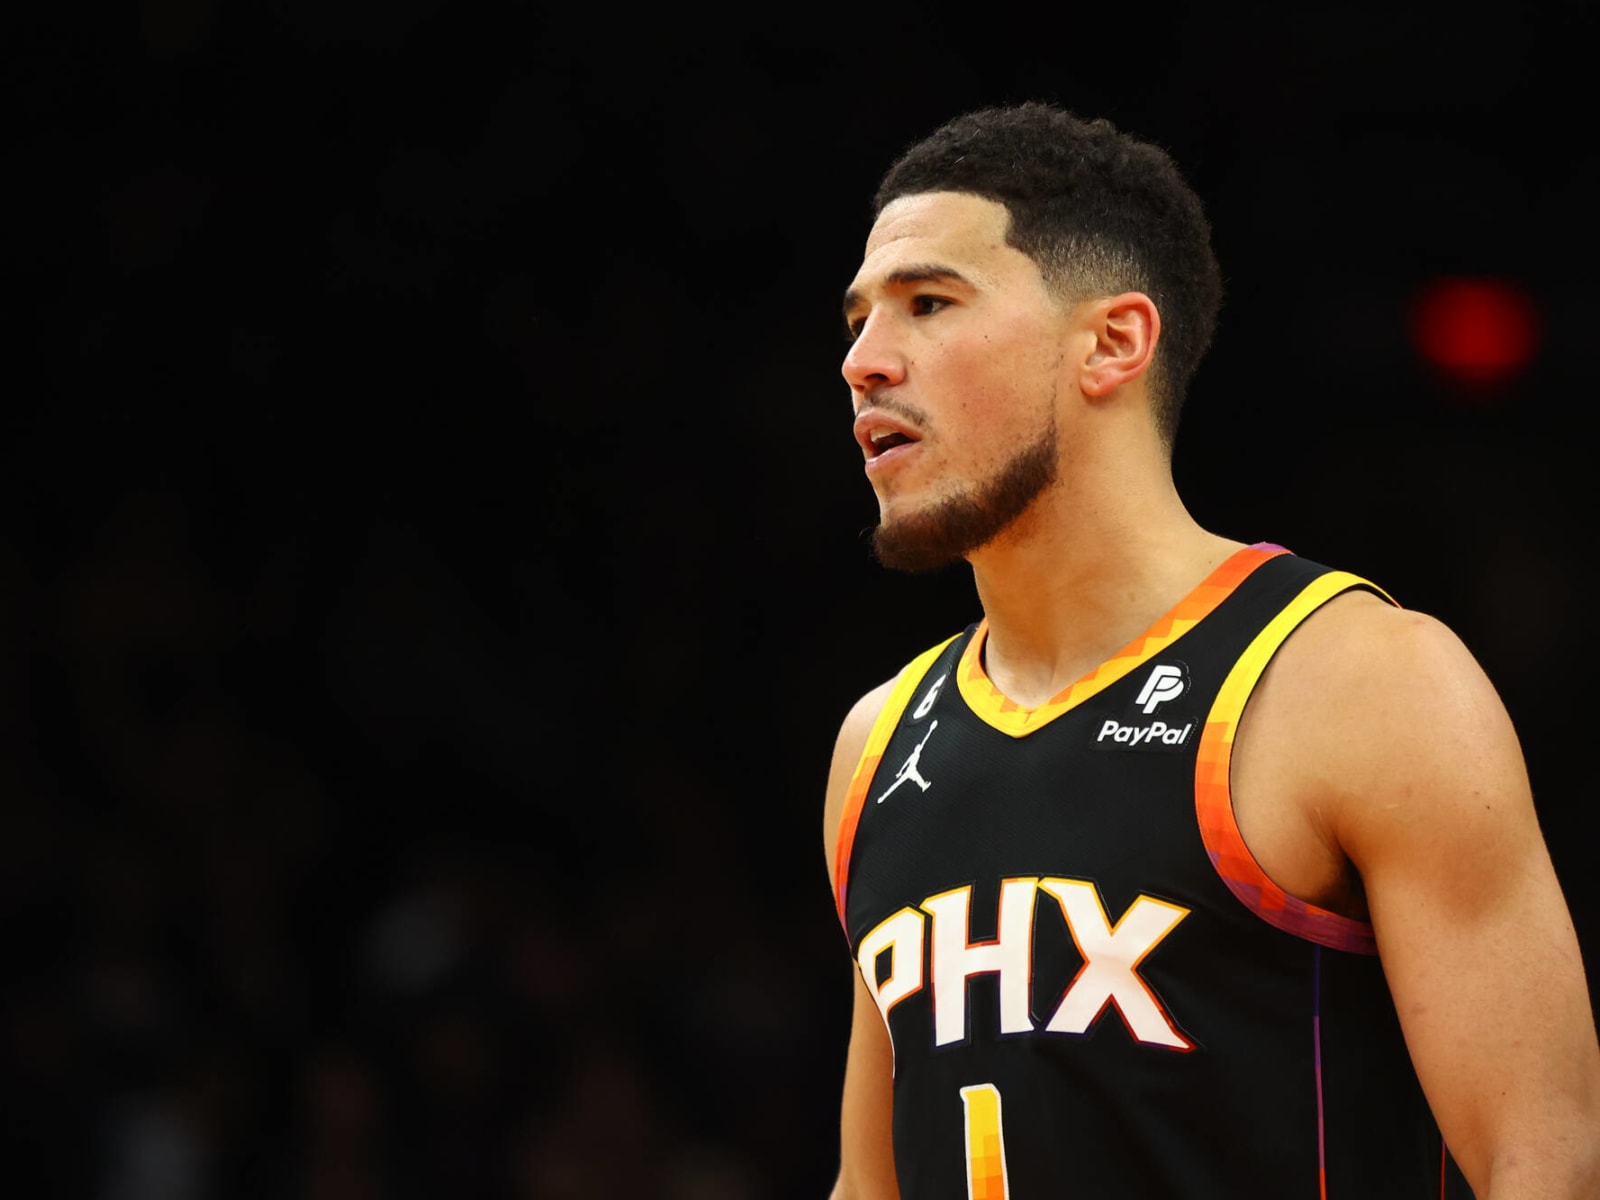 Devin Booker, Bradley Beal, Suns Reveal New Uniforms in Hype Video